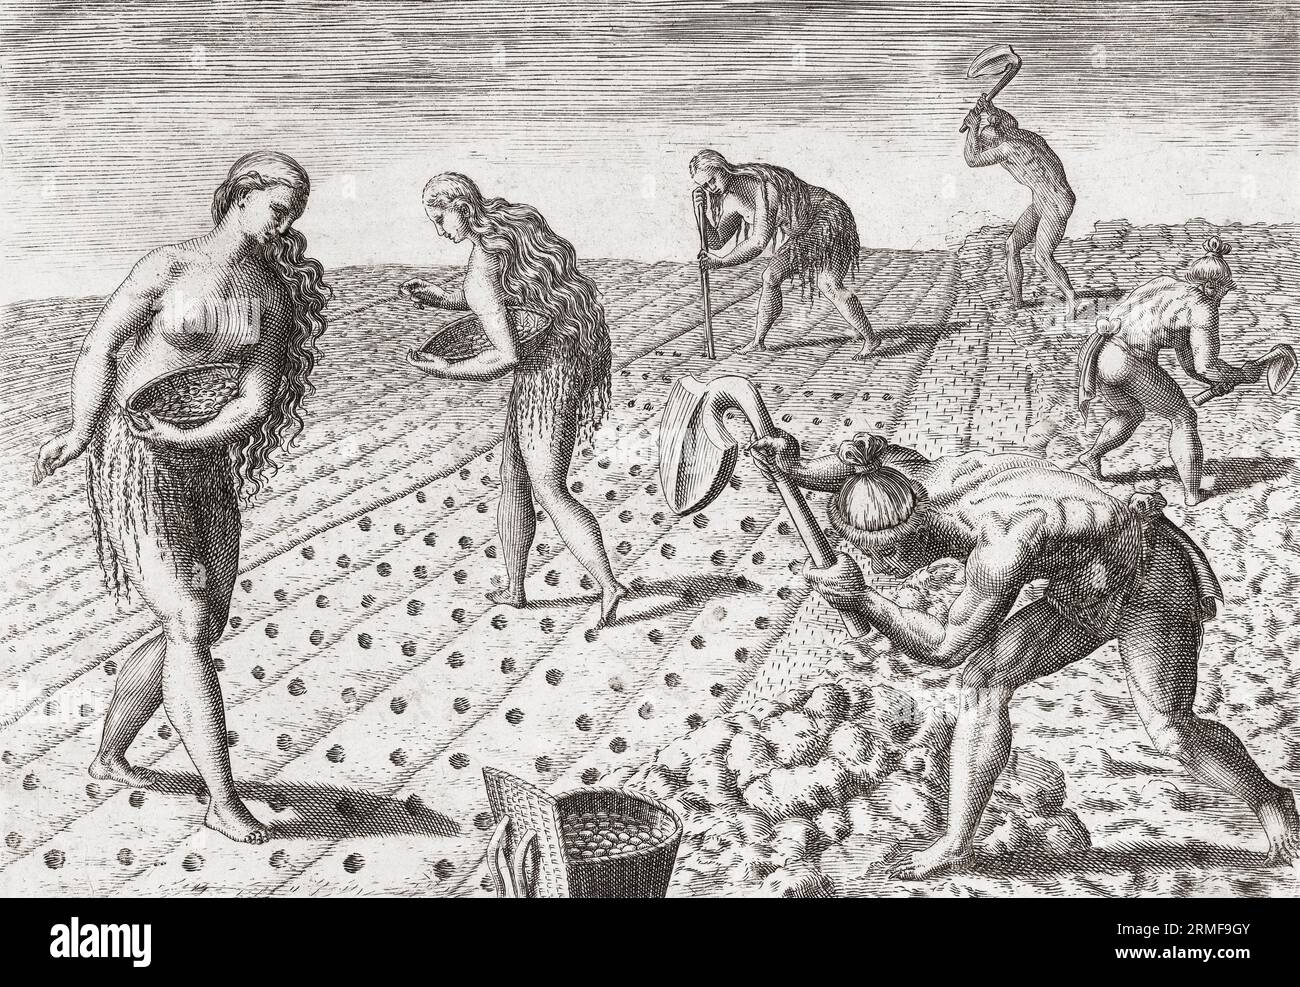 Native Americans, both men and women, till the soil and plant seeds.  After a late 16th century work by Theodor de Bry. Stock Photo